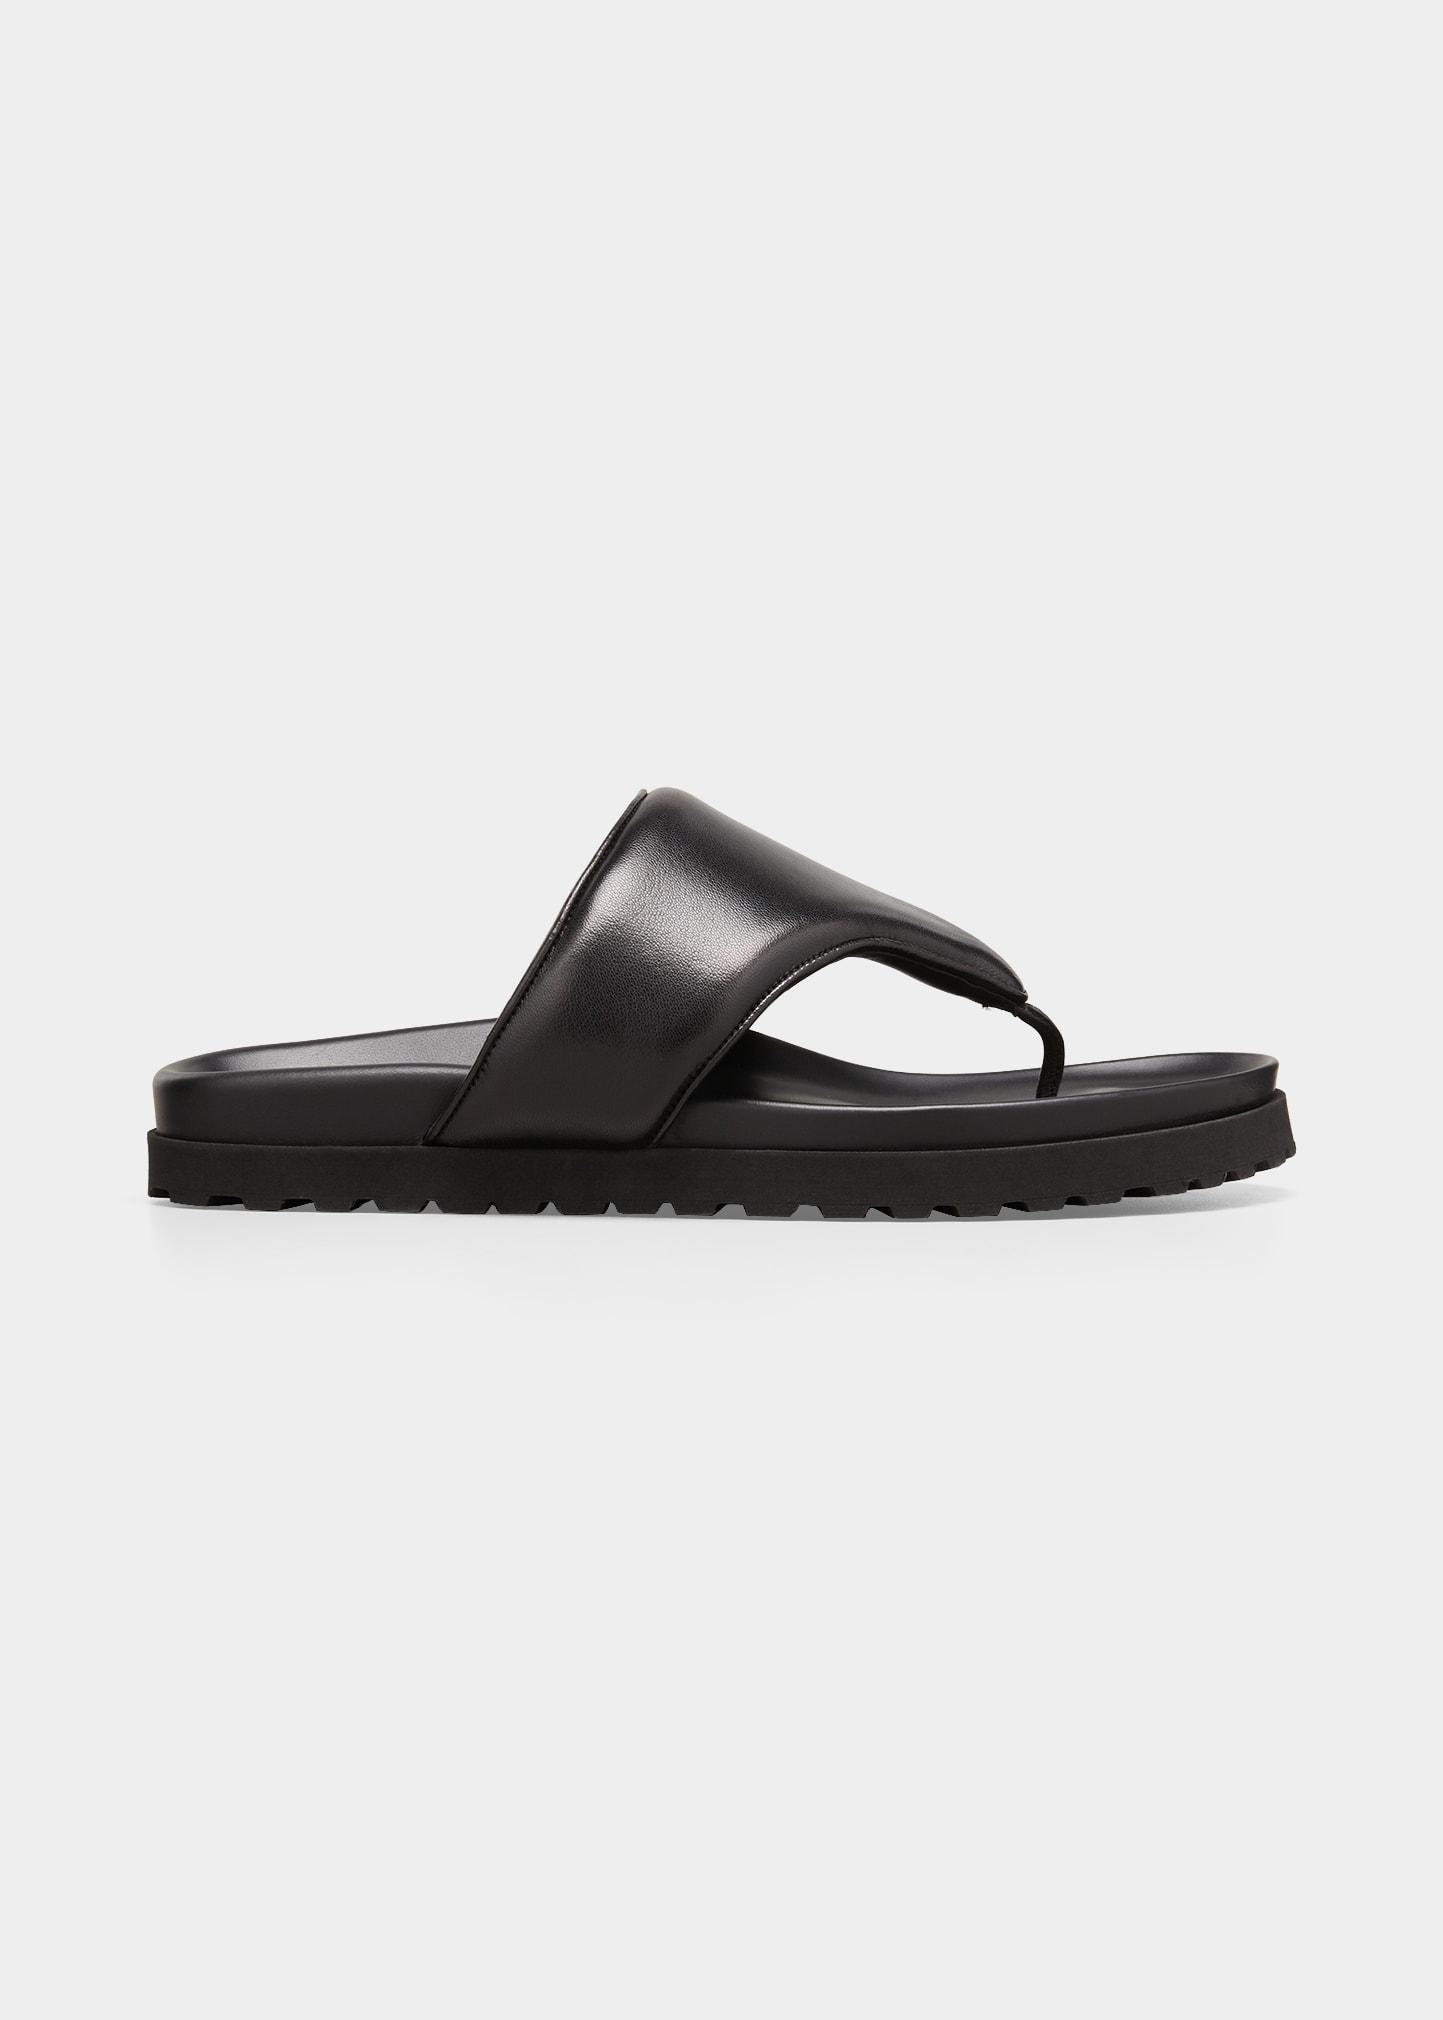 GIA X PERNILLE Napa Thong Flip Flop Sandals in Black | Lyst